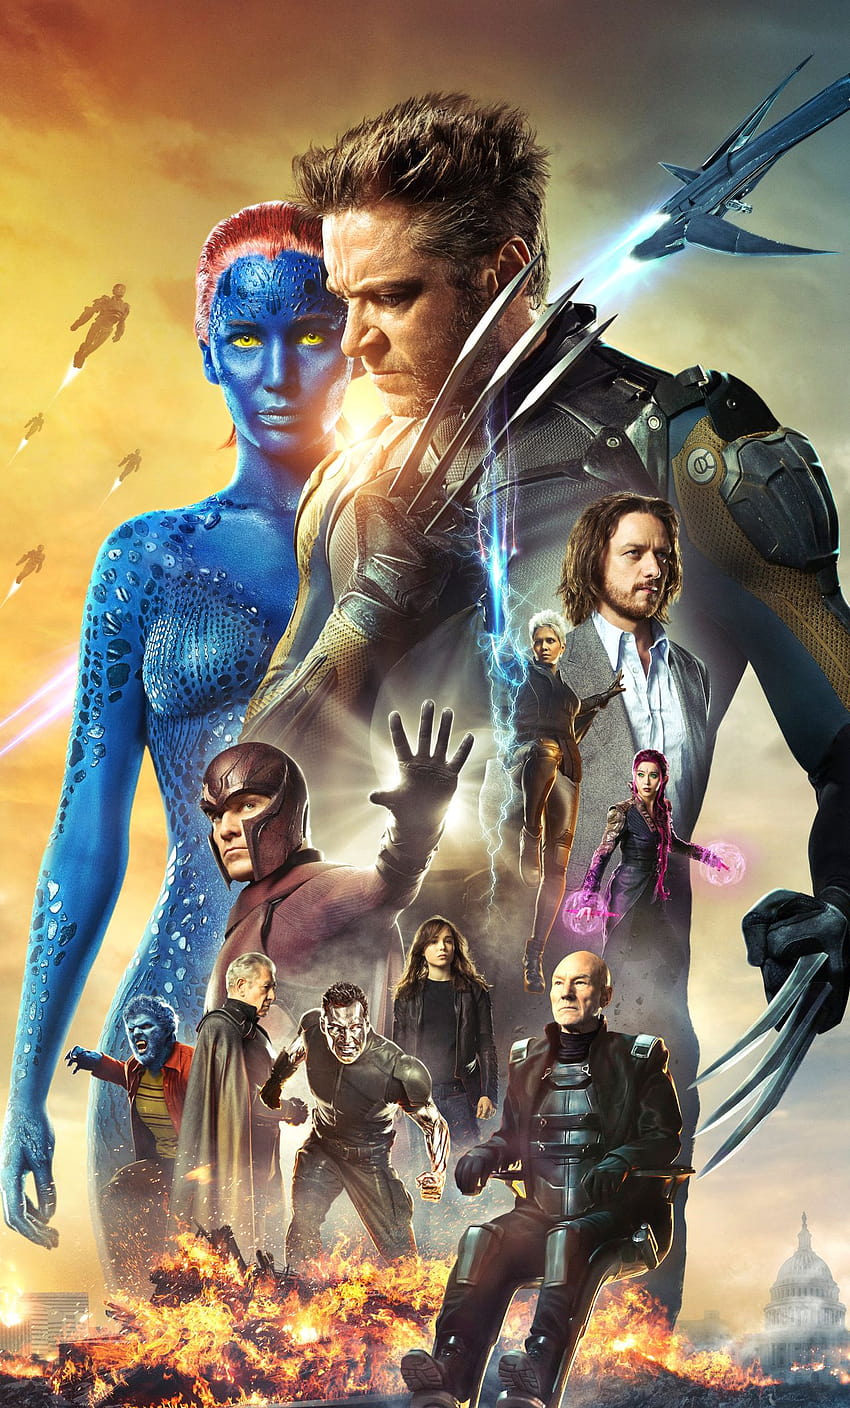 1280x2120 X Men Days Of Future Past Movie Poster iPhone, Backgrounds, and, x men movie iphone HD電話の壁紙